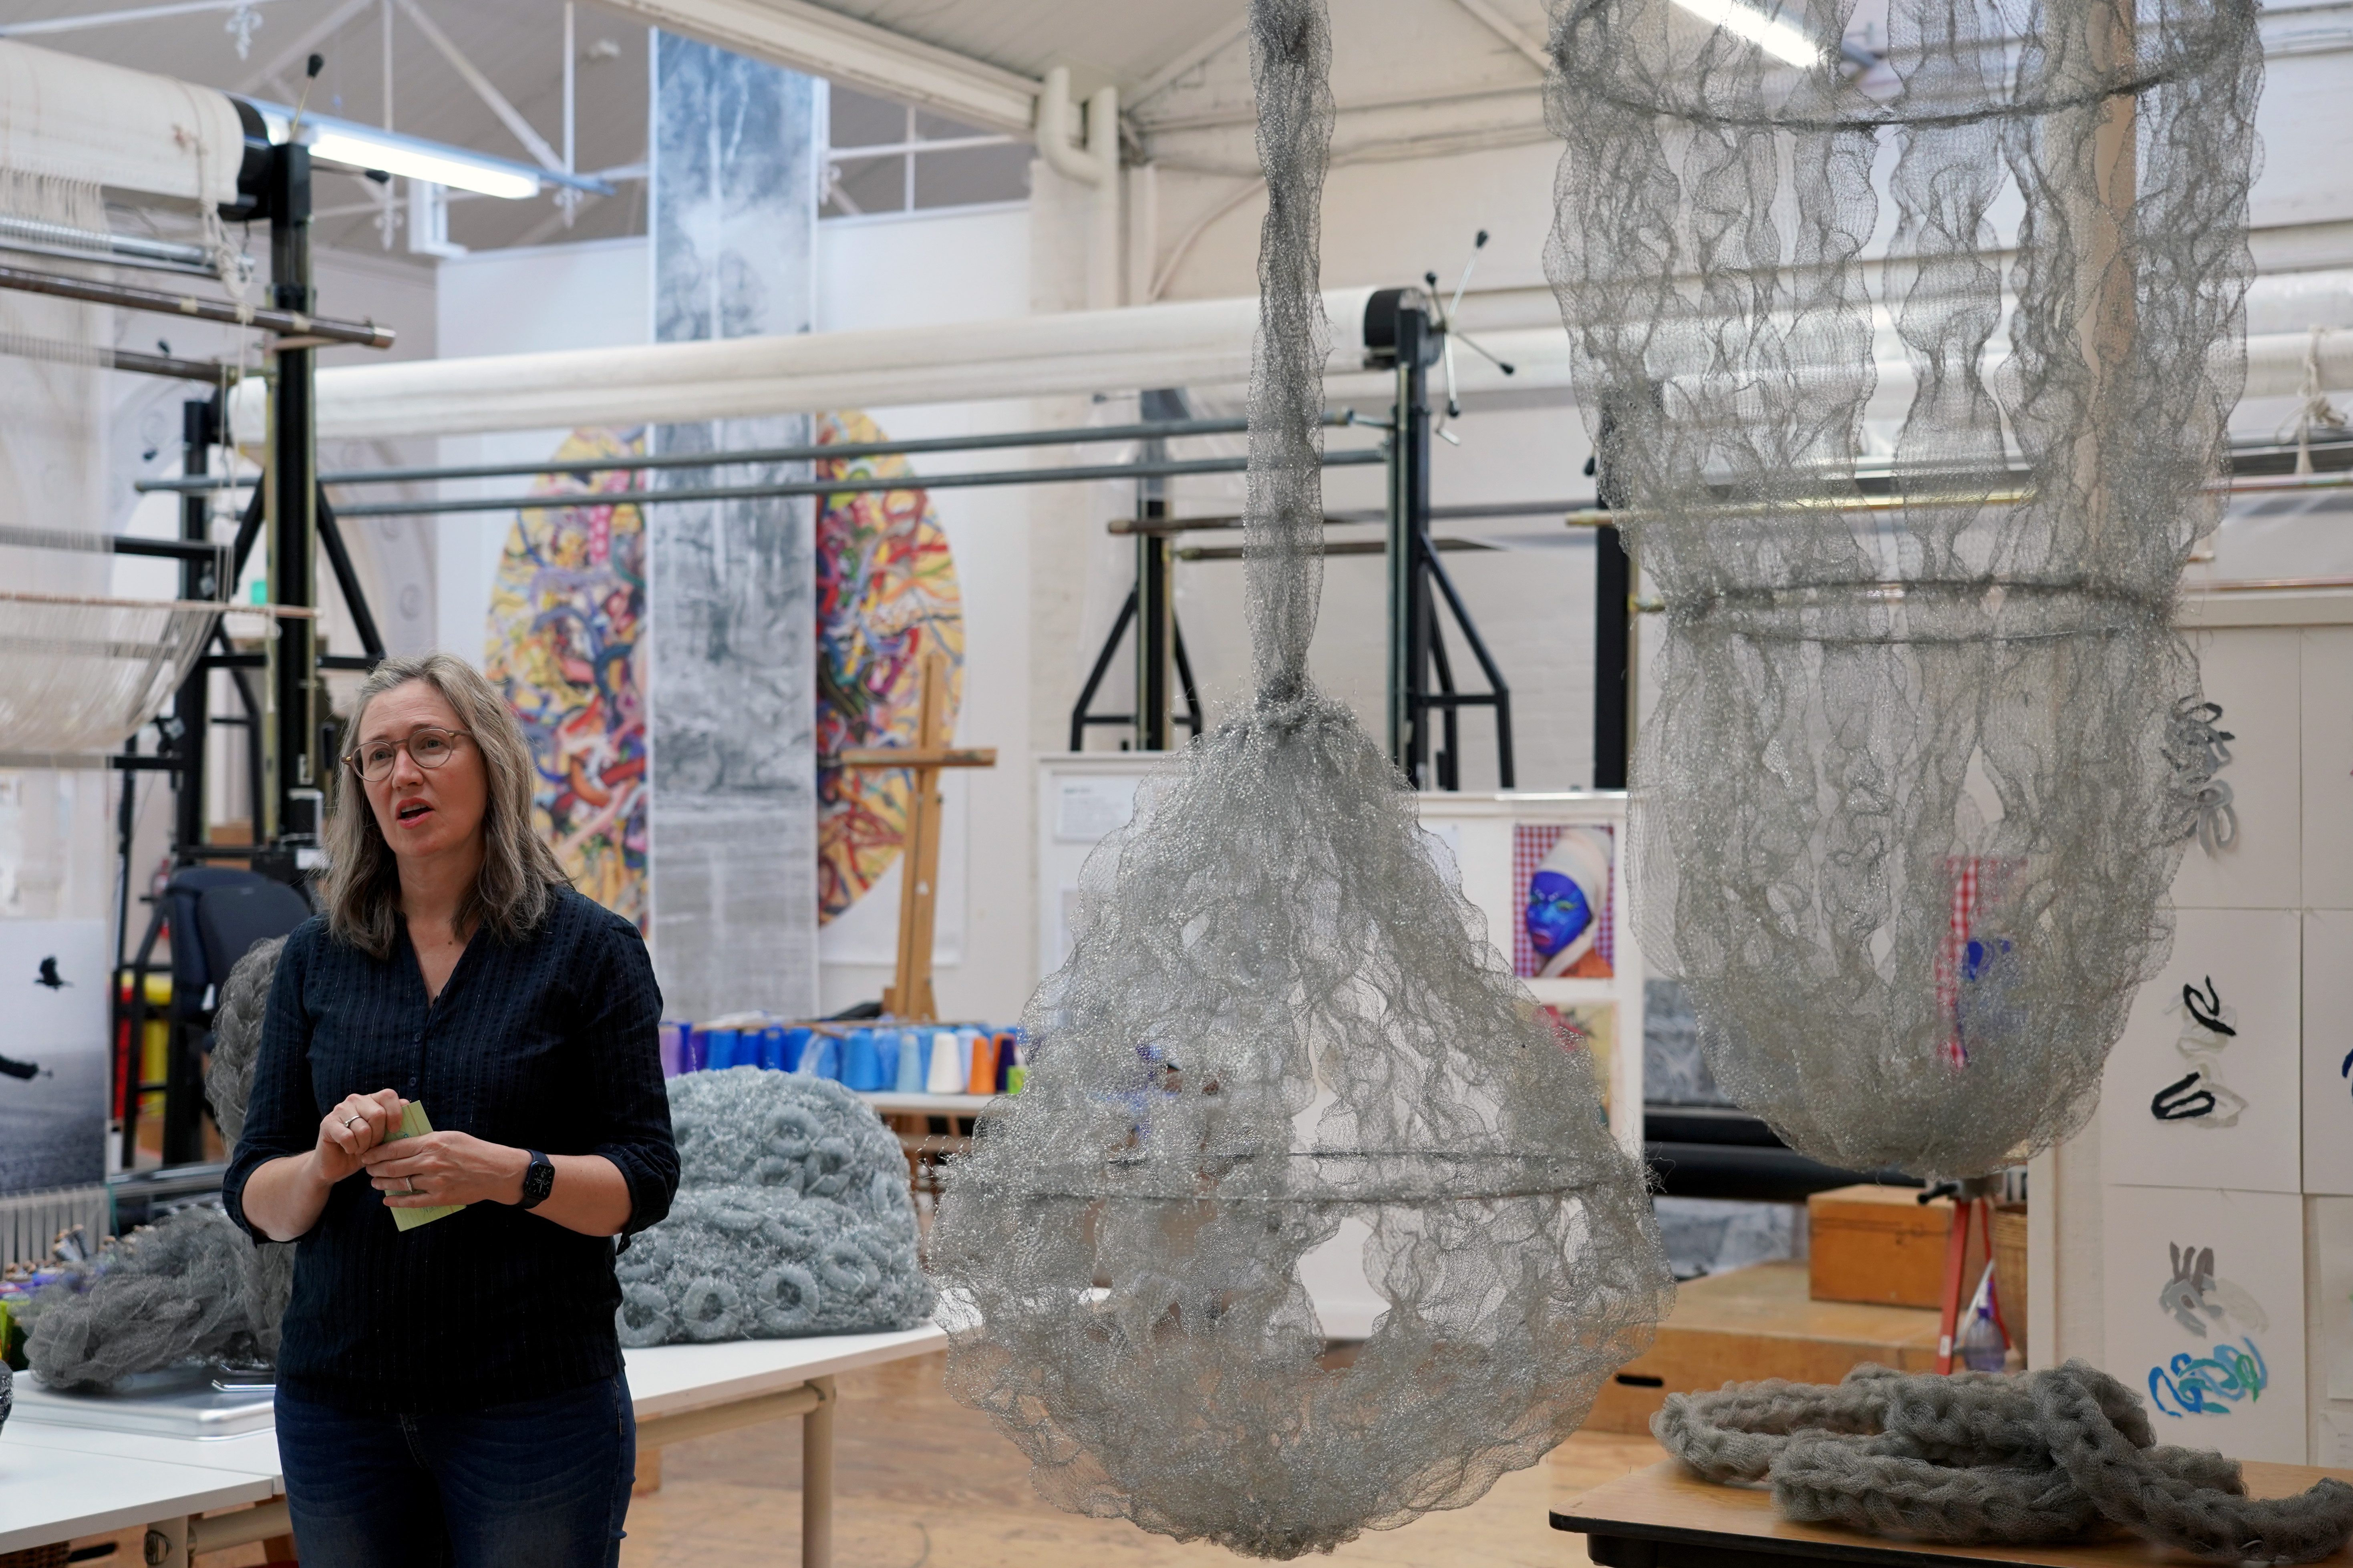 Carolyn Menzies at the ATW during their residency